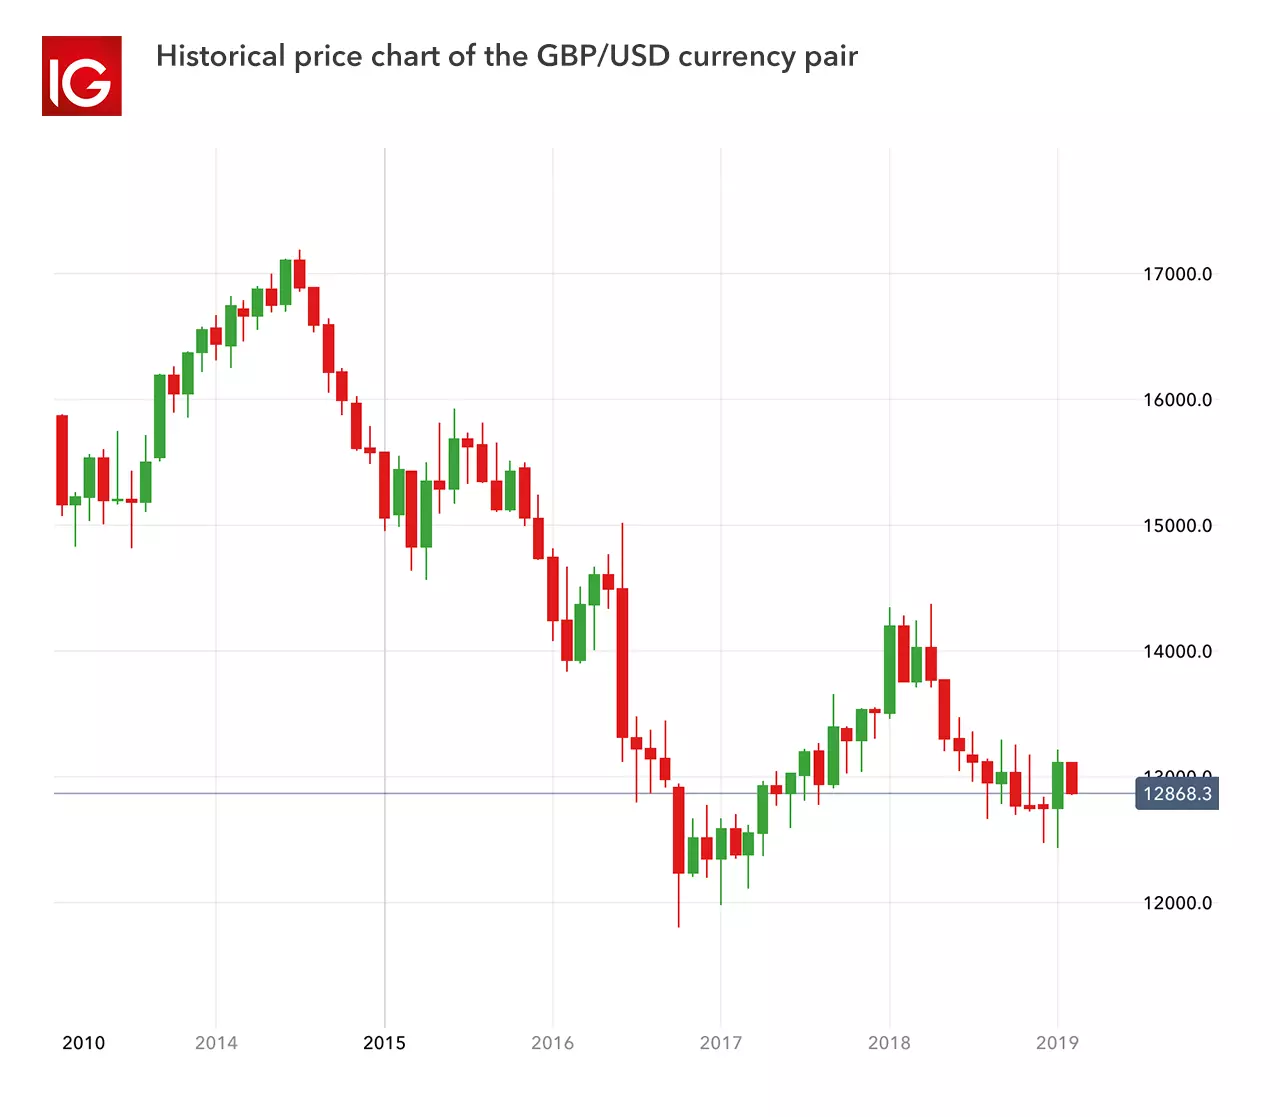 One of the most traded forex pairs is GBP/USD